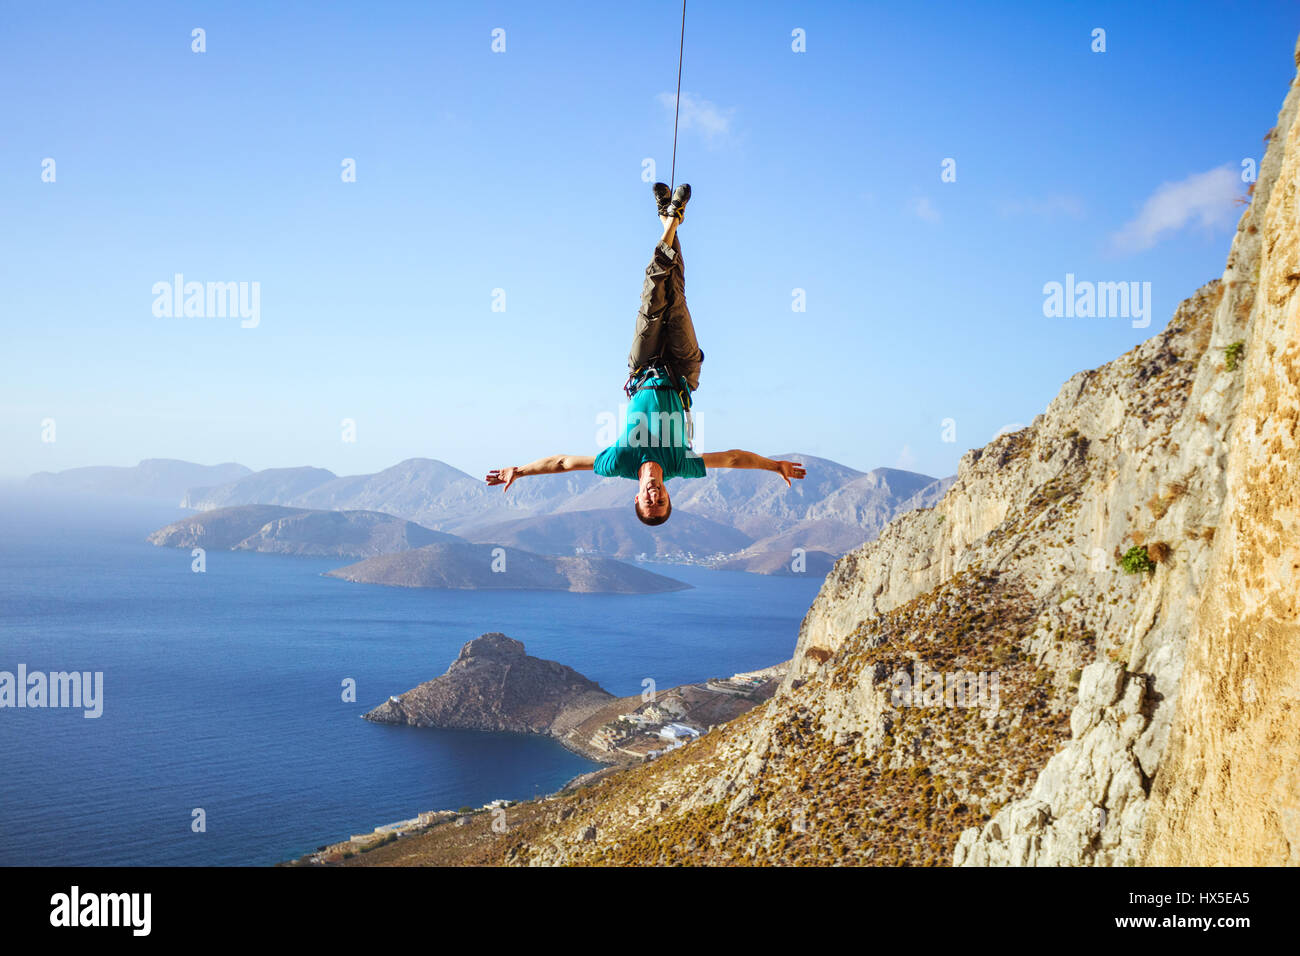 Cheerful rock climber swinging on rope upside down while fooling around, against view of coast Stock Photo